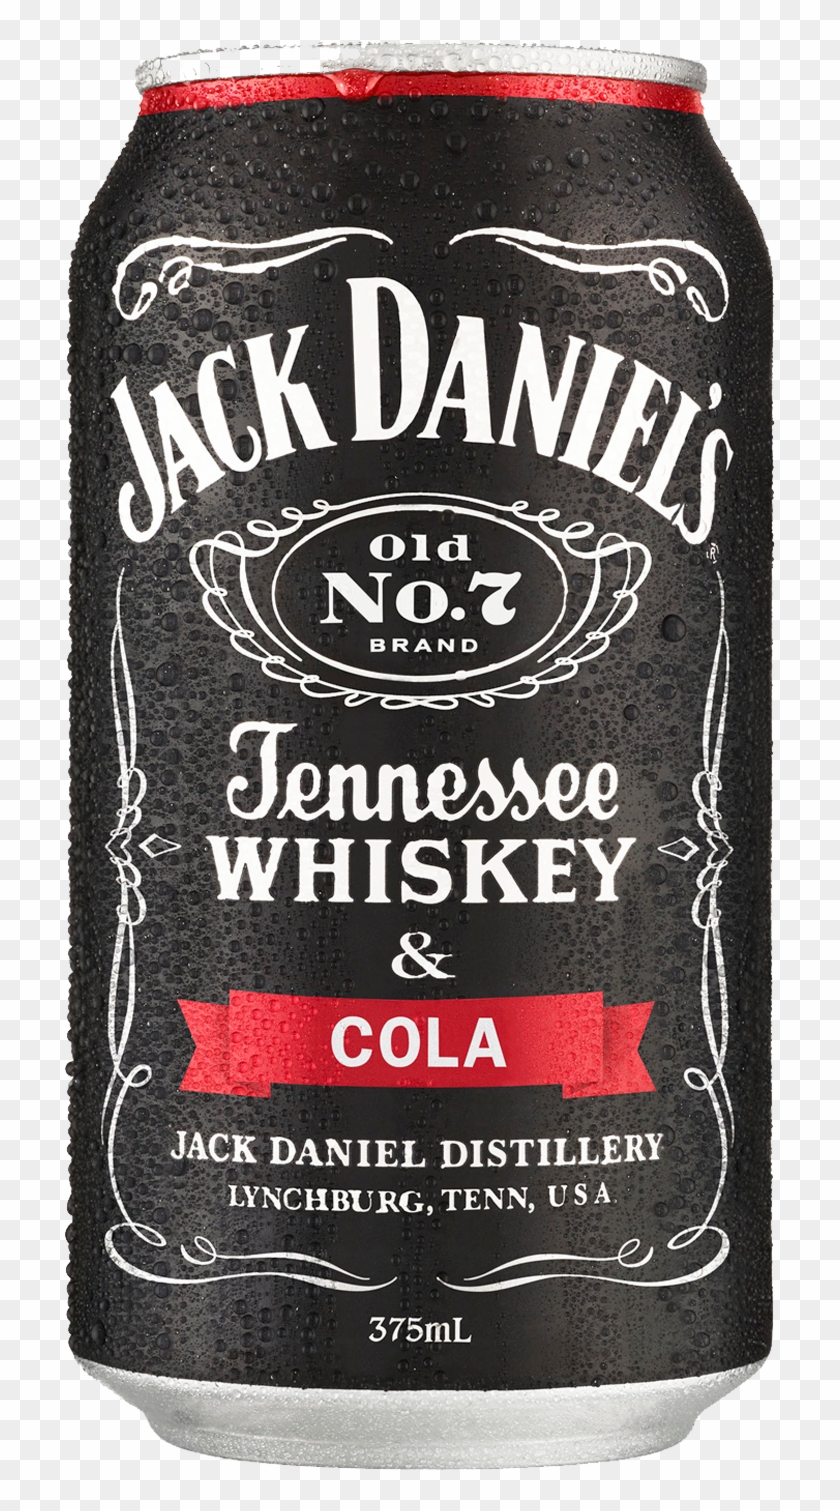 Jack Daniel's Tennessee Whiskey & Cola Cans 10 Pack - Jack Daniels And Cola Clipart #2448201